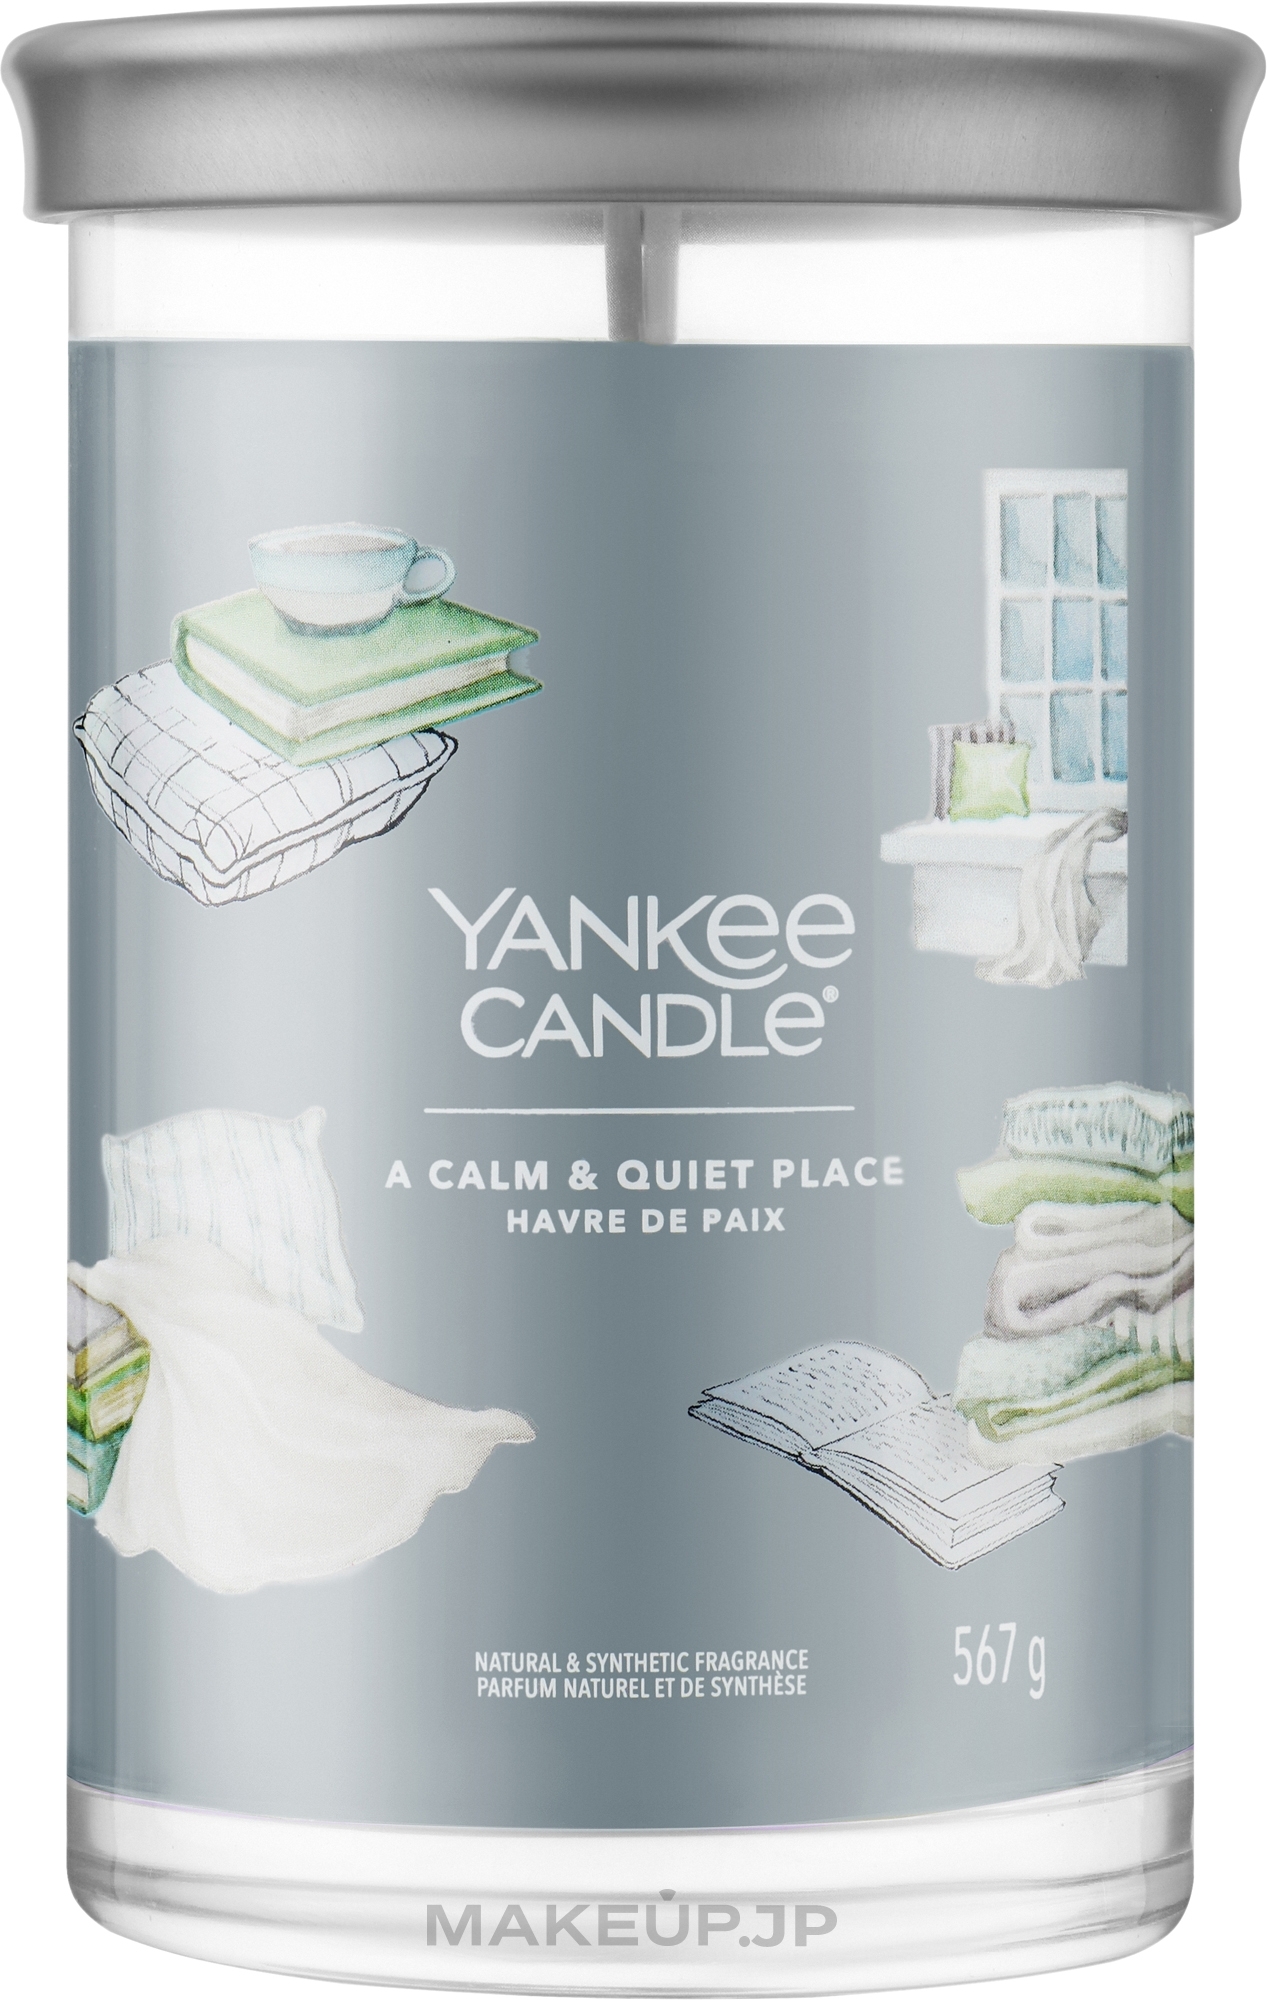 Tumbler Candle 'Calm & Quiet Place', 2 wicks - Yankee Candle A Calm & Quiet Place Tumbler — photo 567 g